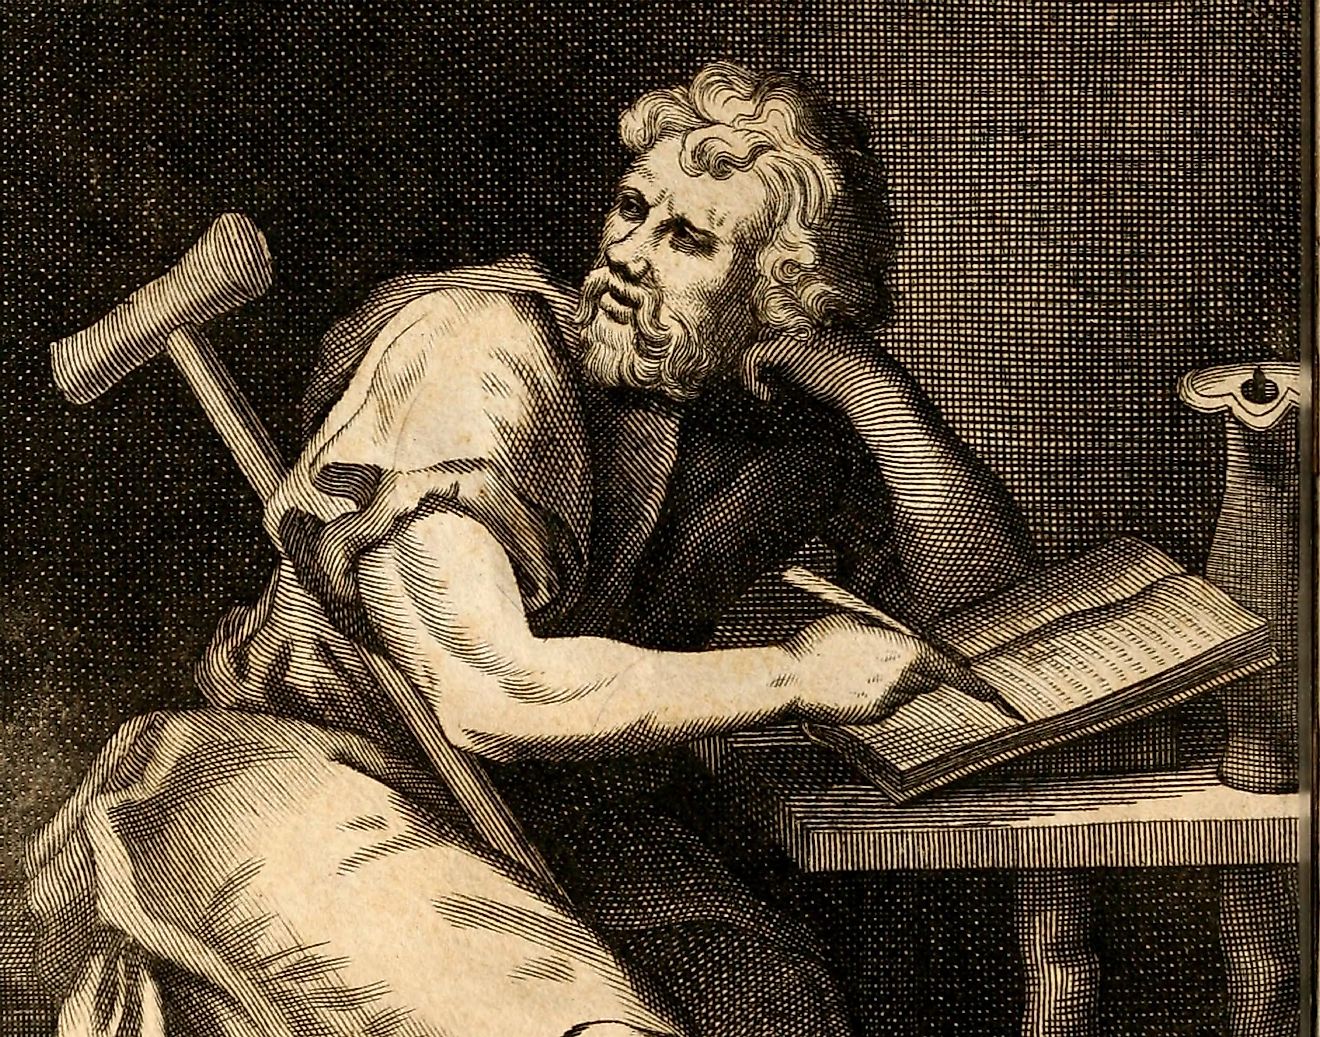 Epictetus writing at a table with a crutch draped across his lap and shoulder